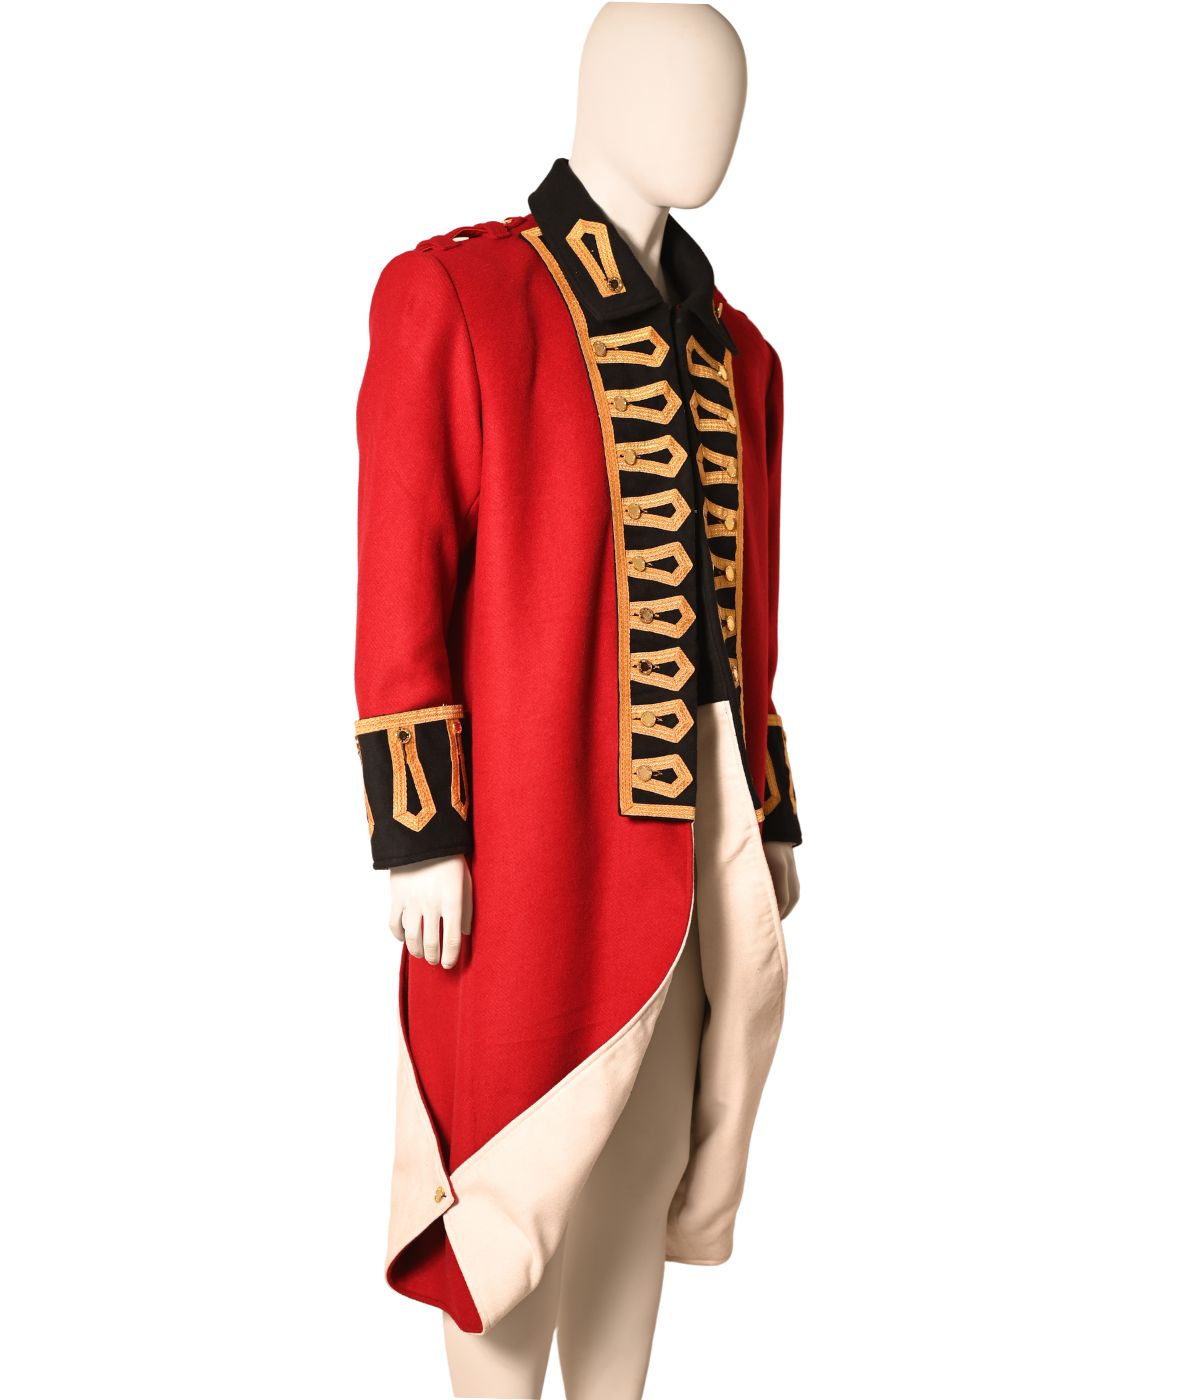 19th Century Military Officer Coat